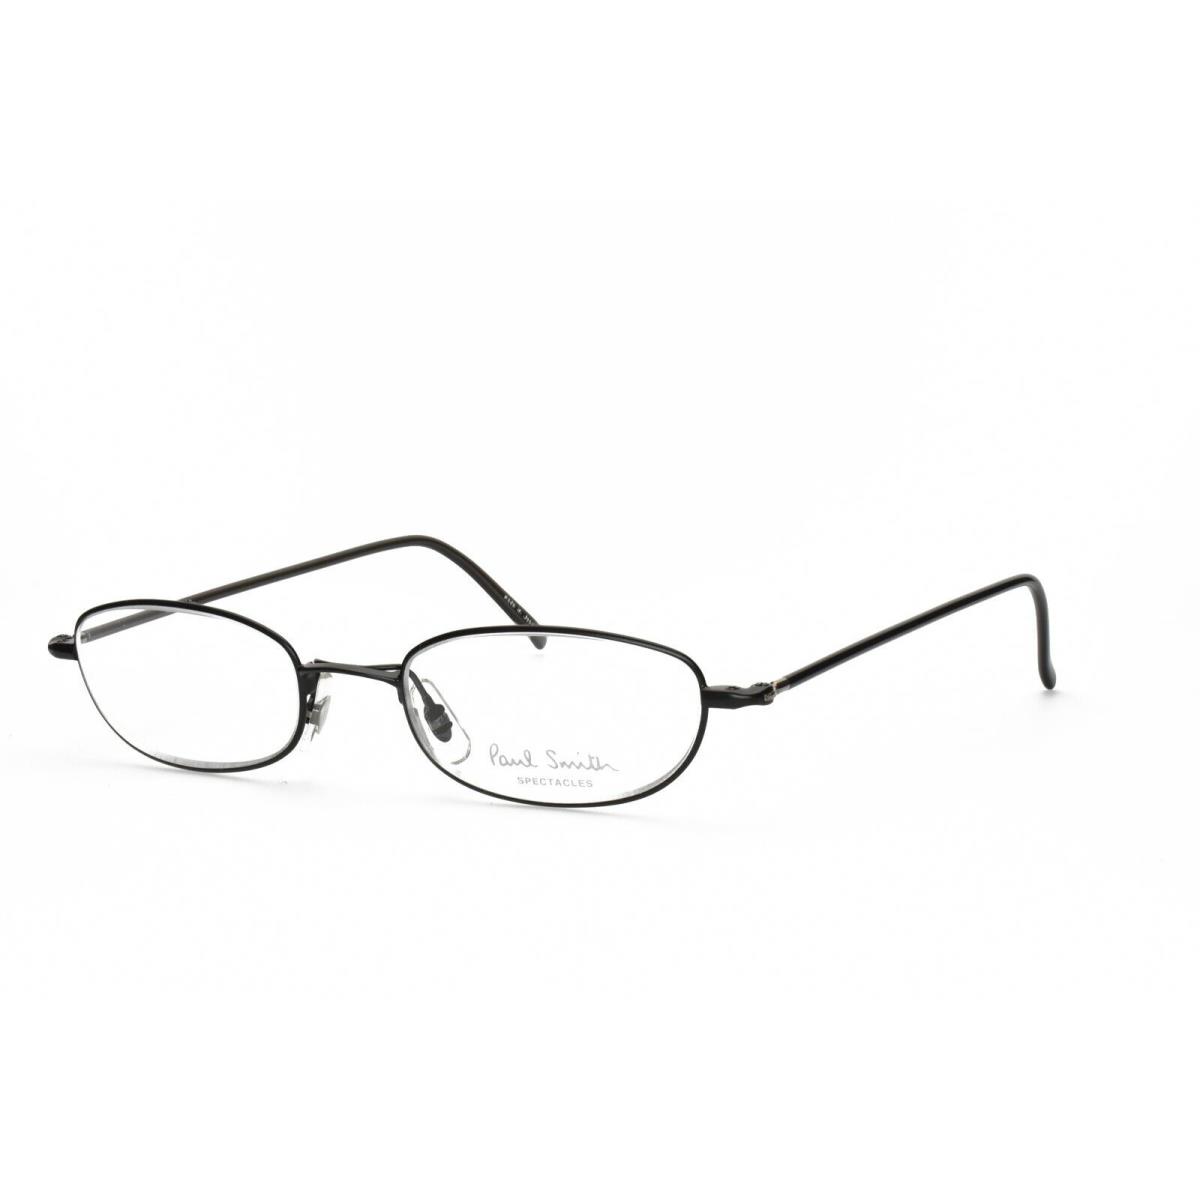 Paul Smith PS 140 OX Eyeglasses Frames Only 47-18-145